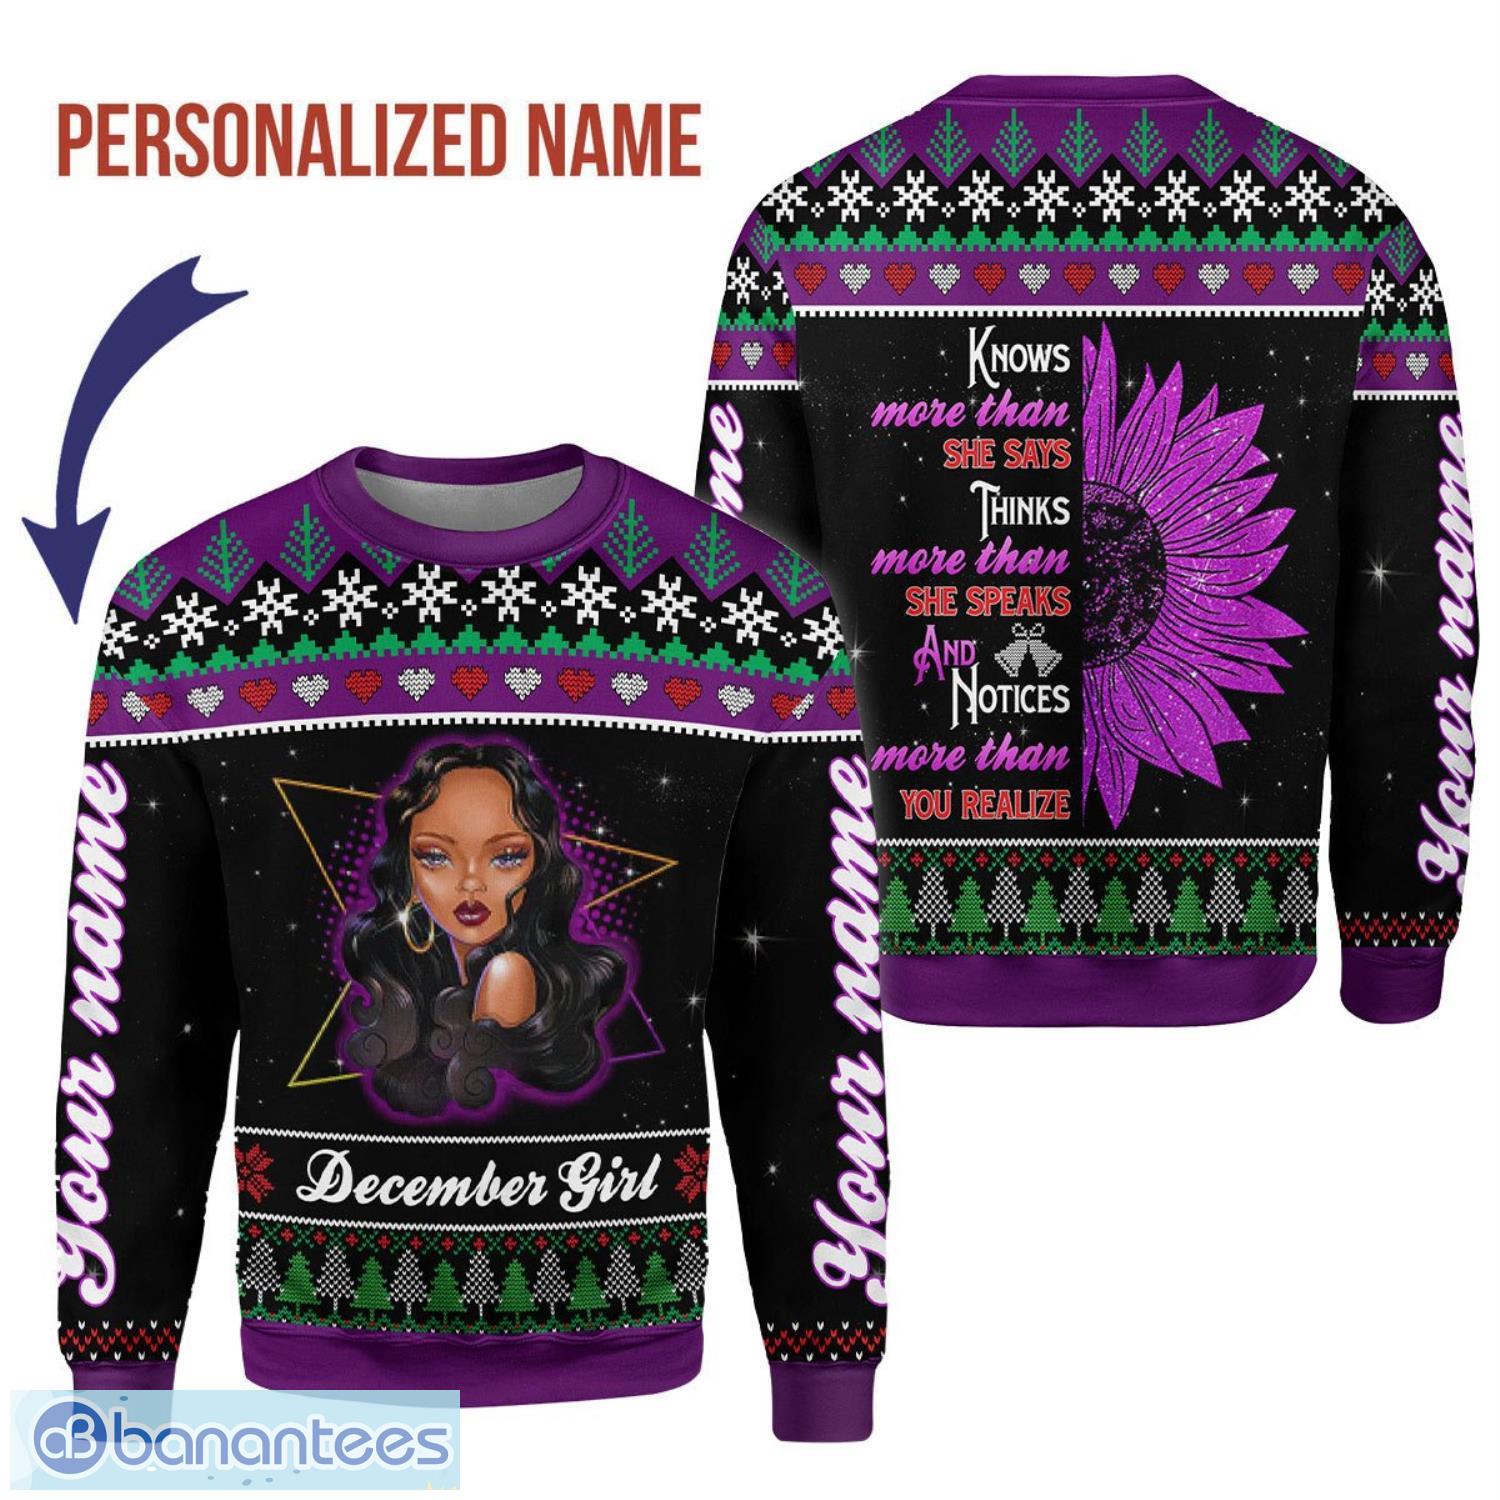 Personalized Name December Girl Knows More Than She Says 3D Ugly Christmas Sweater Christmas Gift Product Photo 1